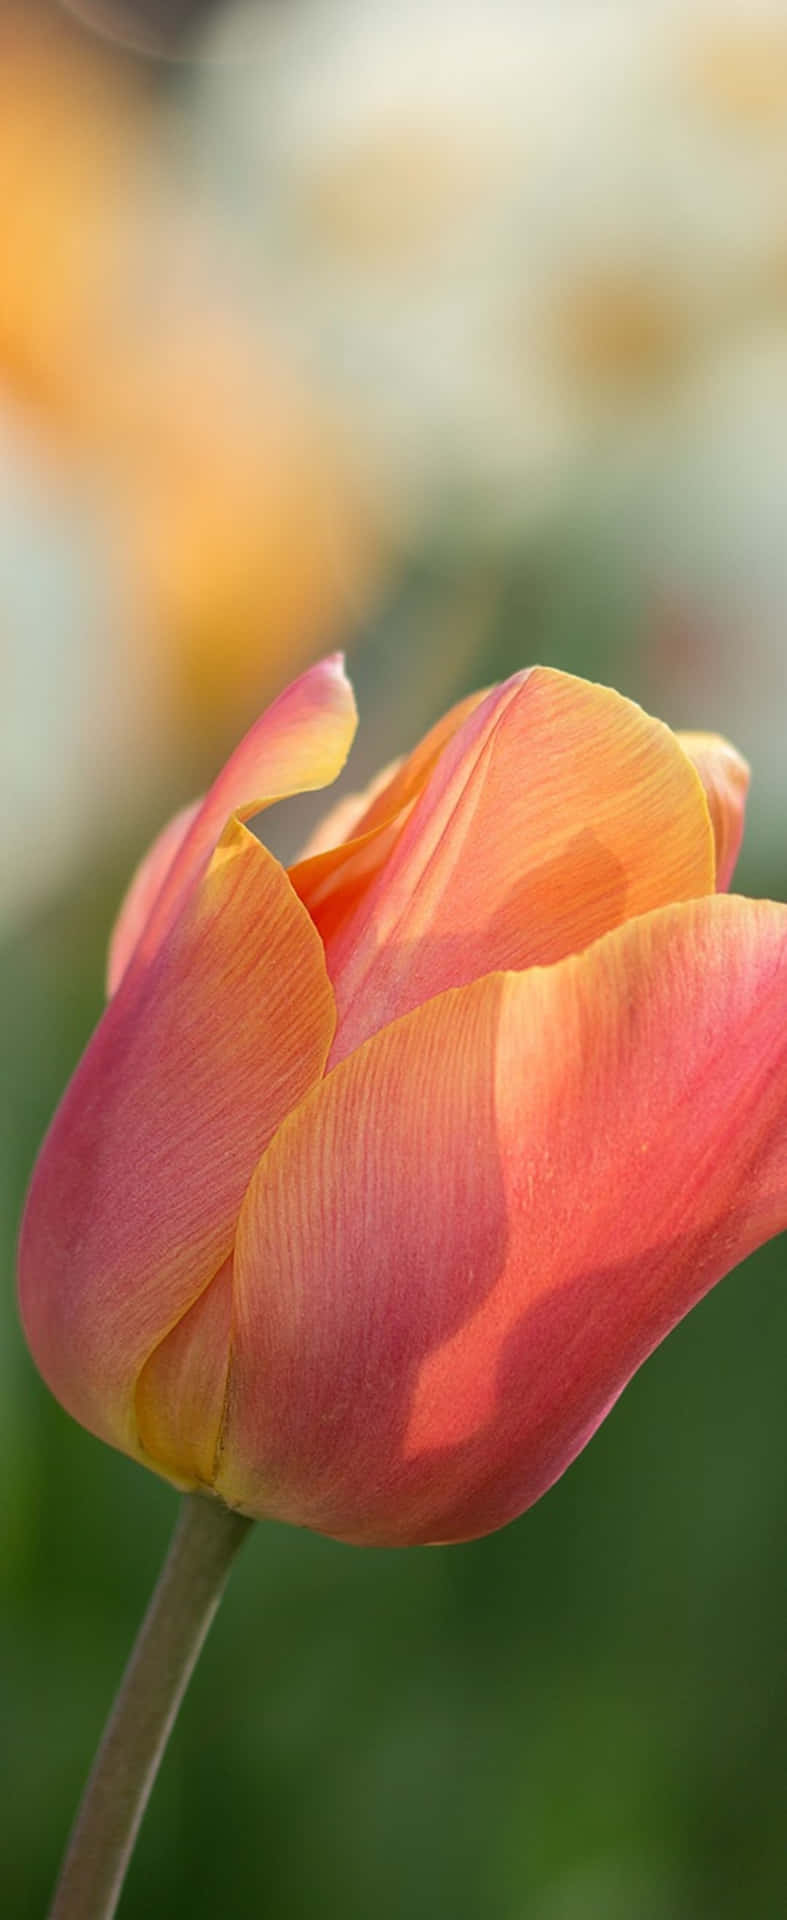 A Tulip Flower With A Yellow And Orange Color Wallpaper